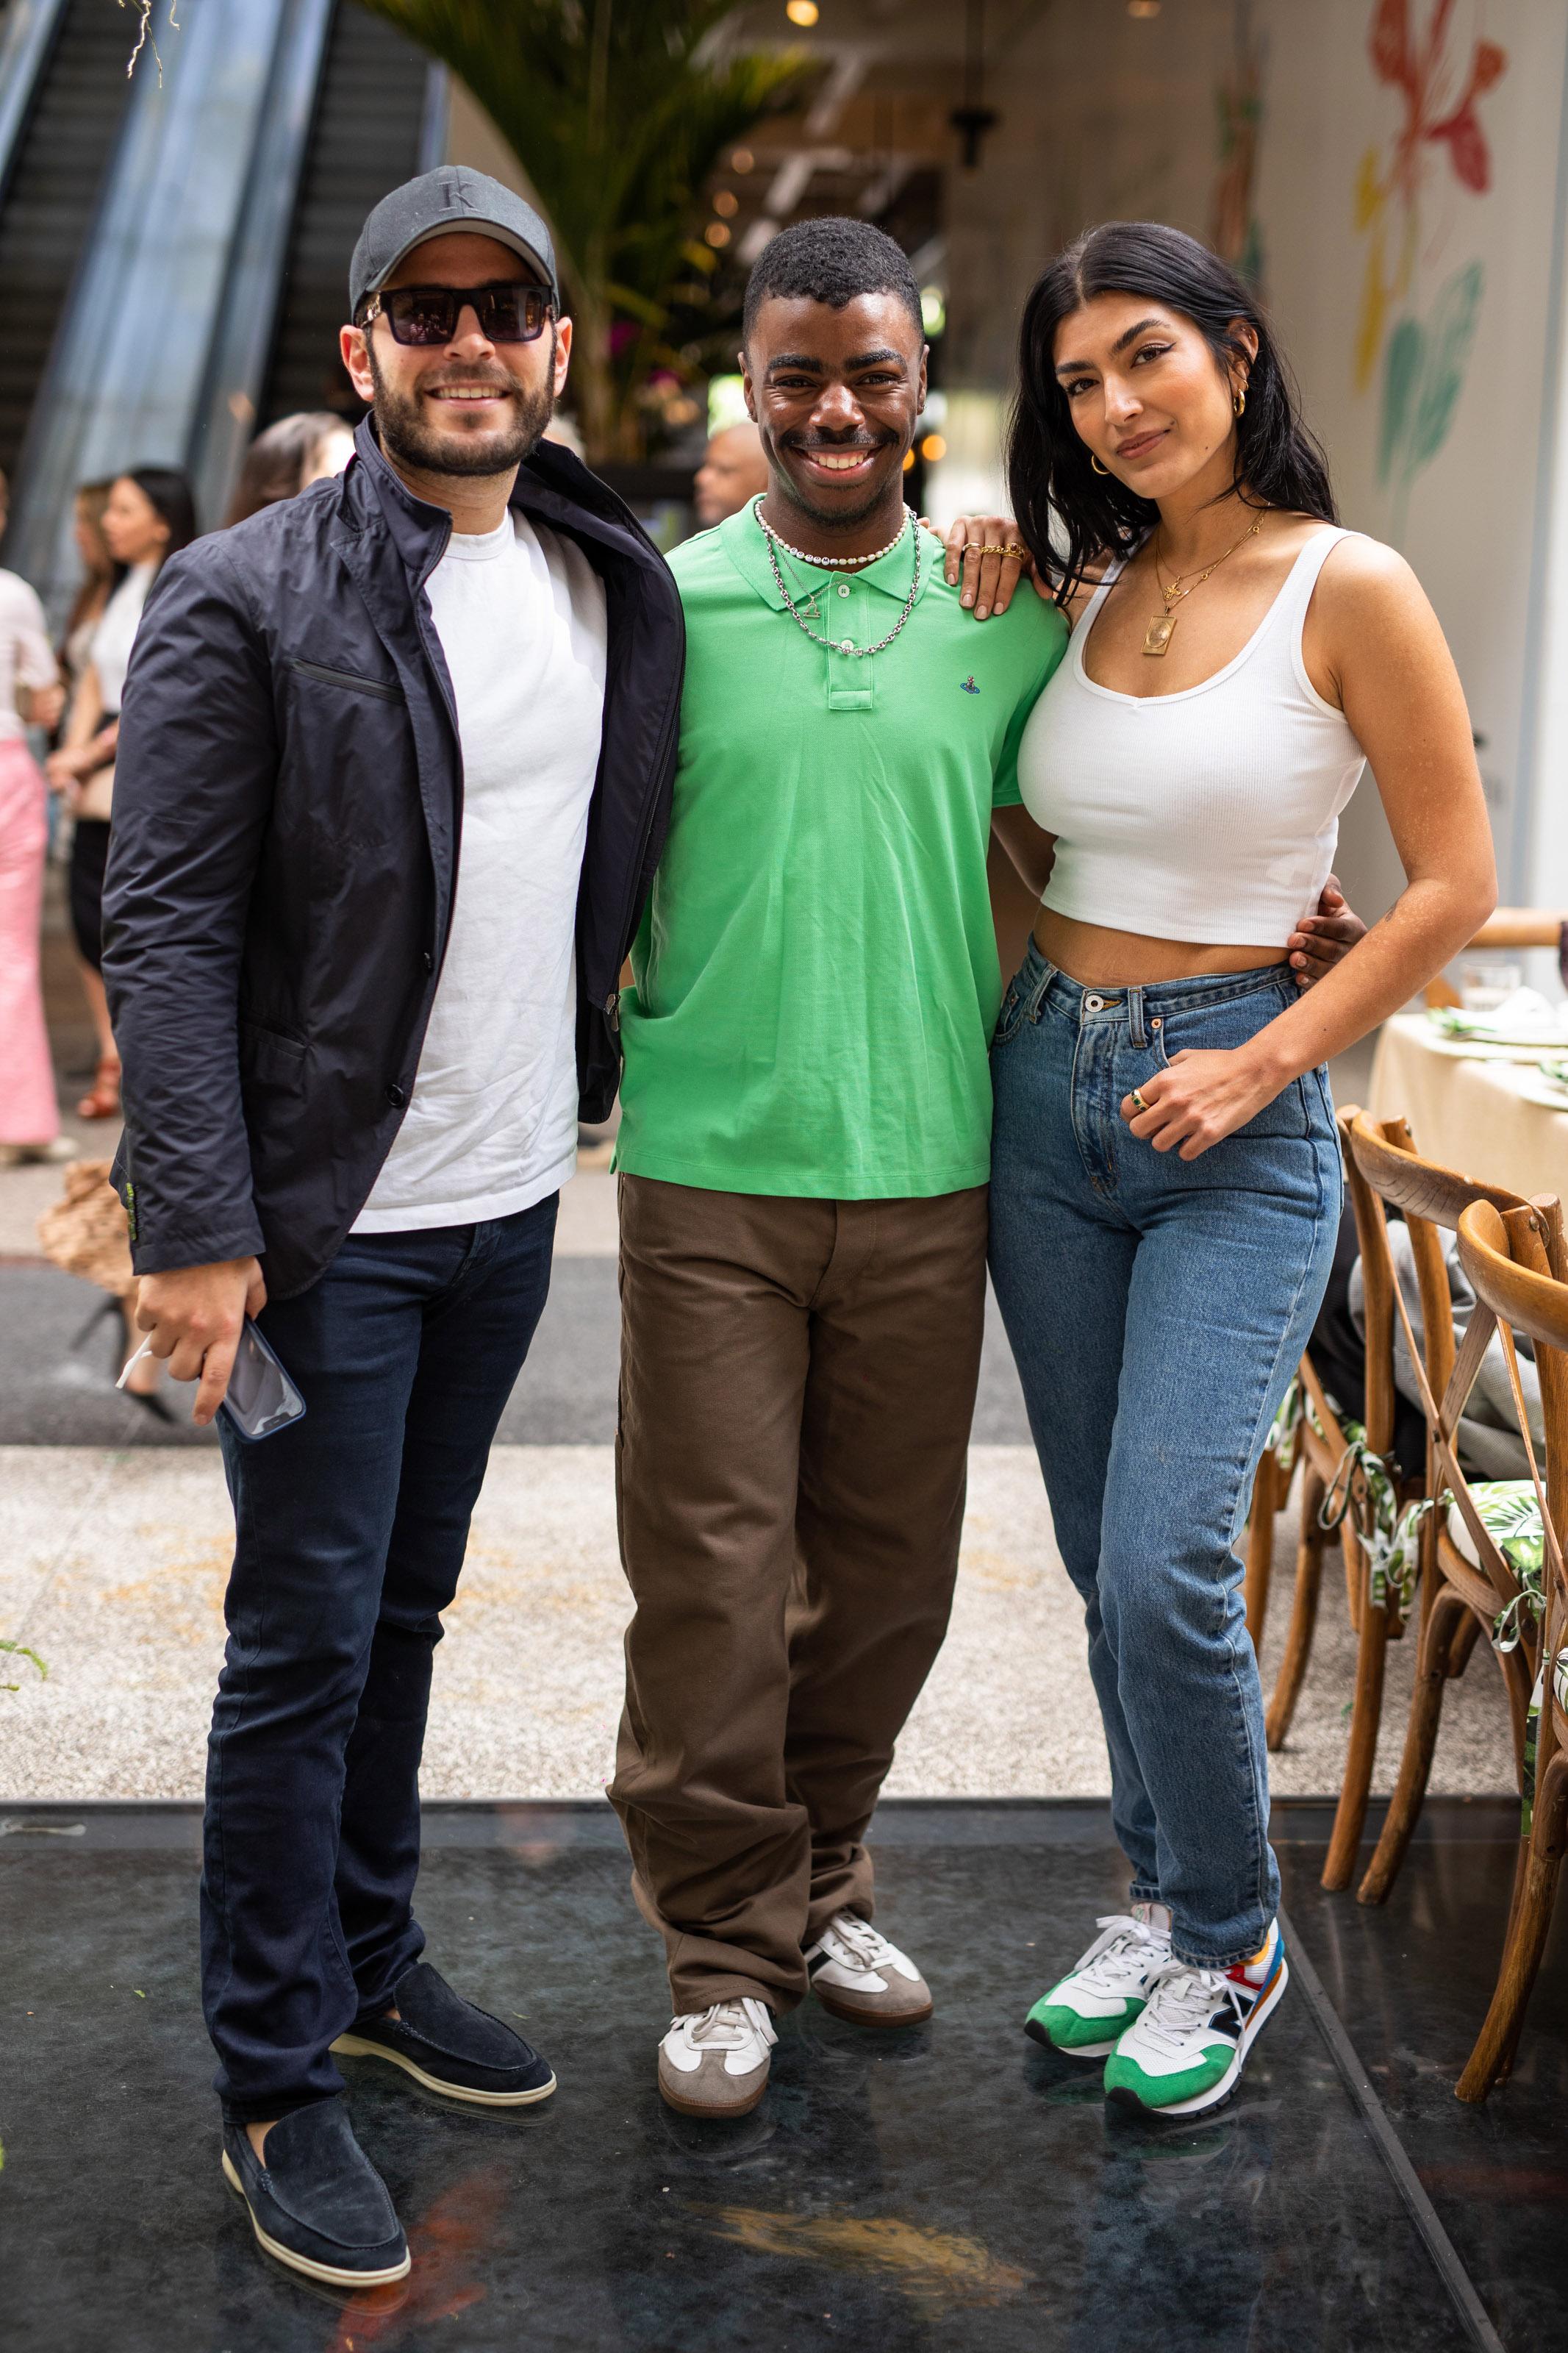 Tyrell Hampton poses for a photo with two other attendees